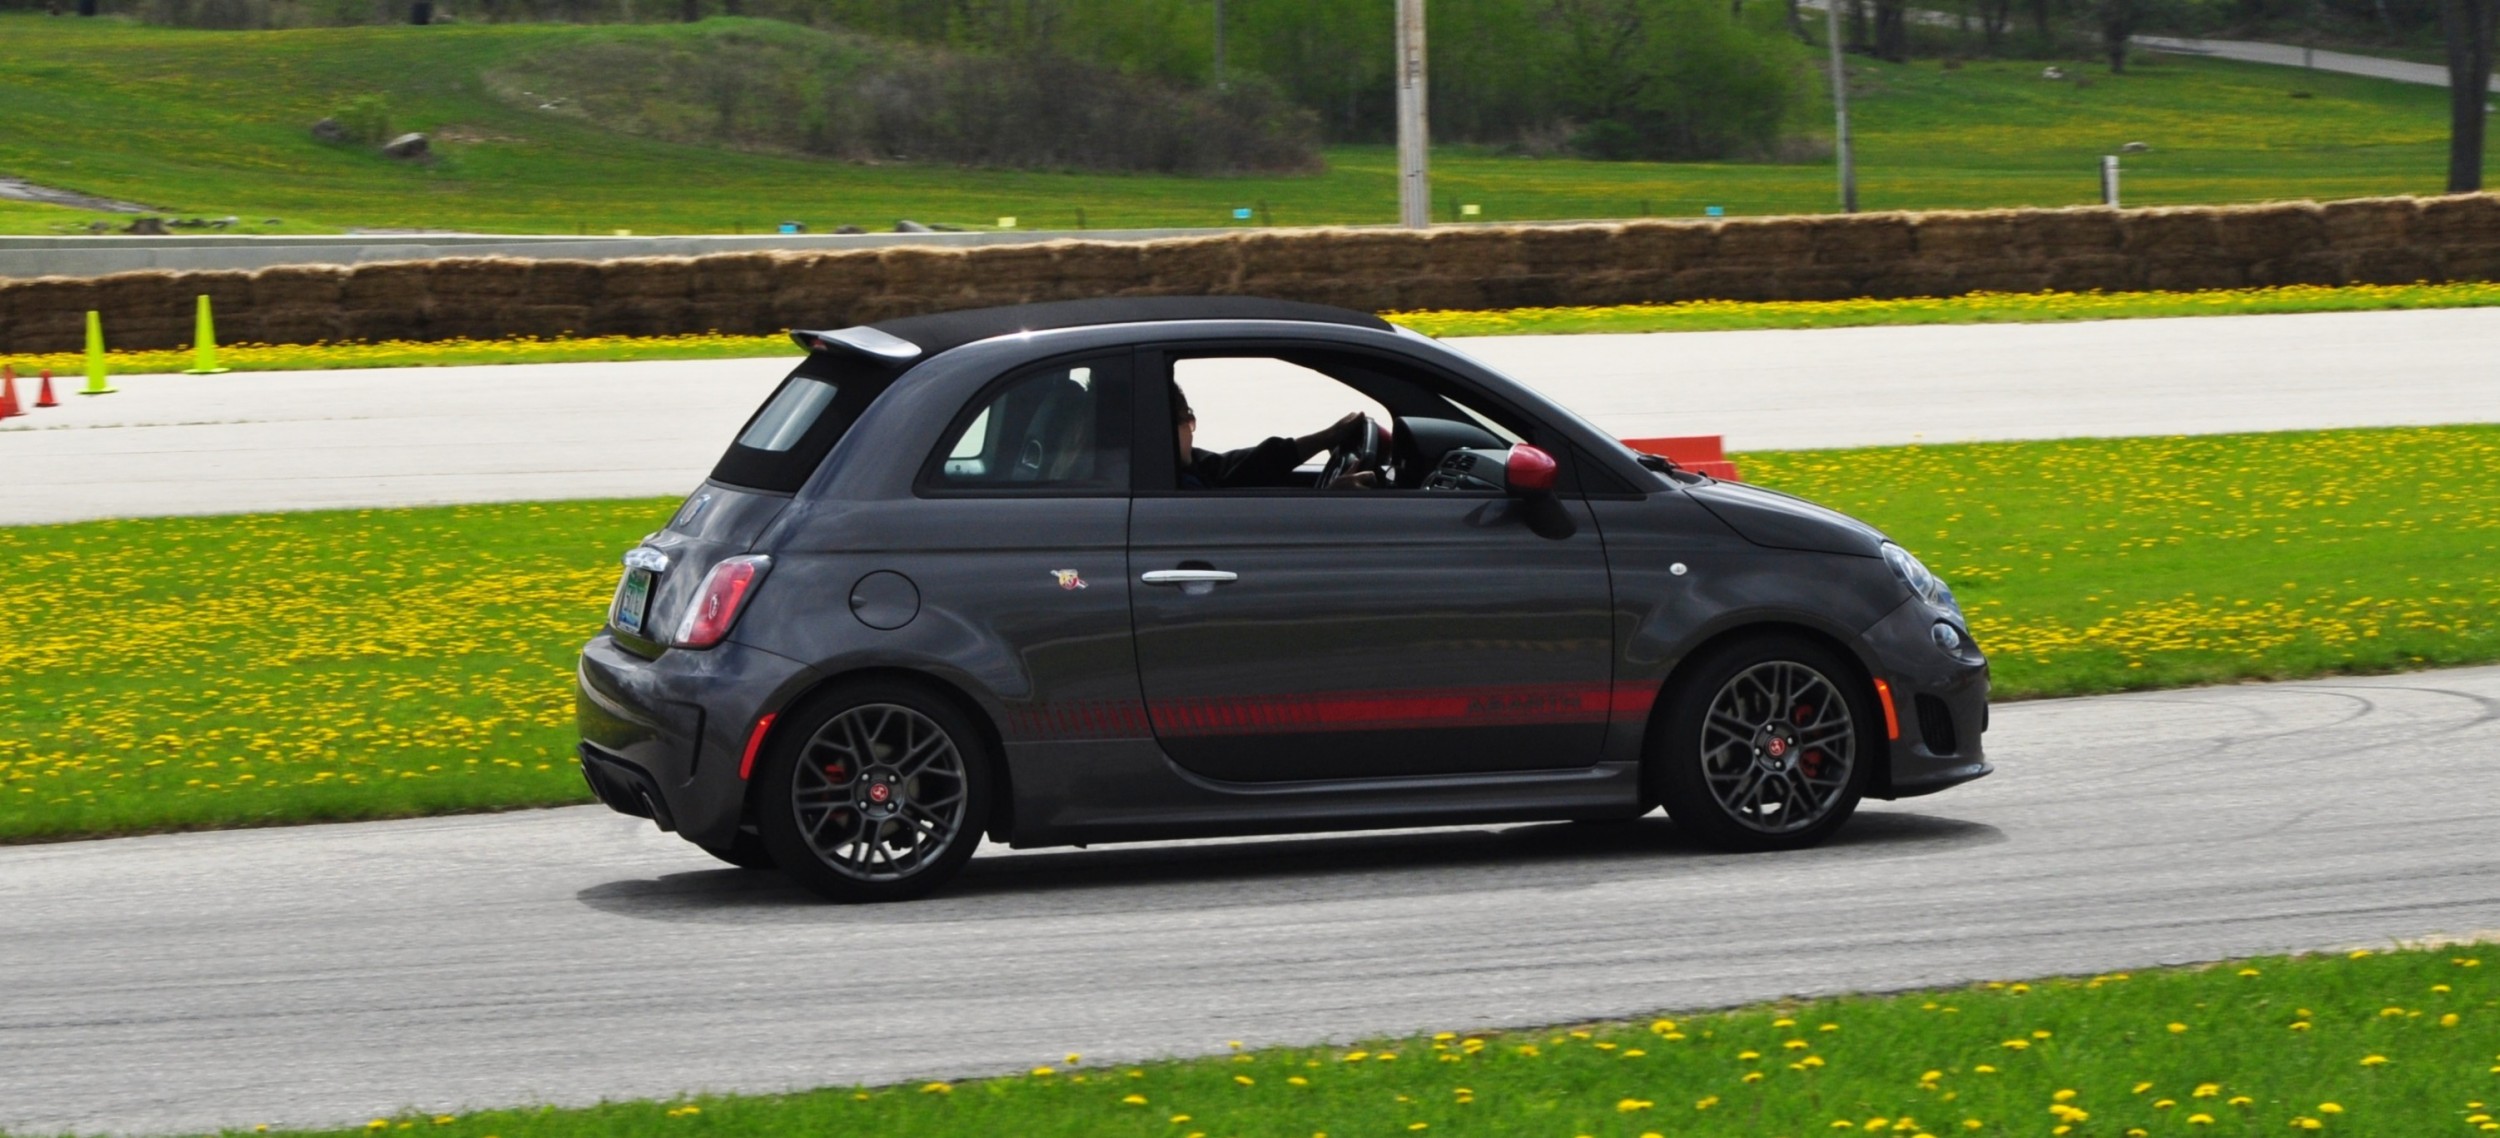 2014 Fiat Abarth 500C Wins Hottest Exhaust Note on 